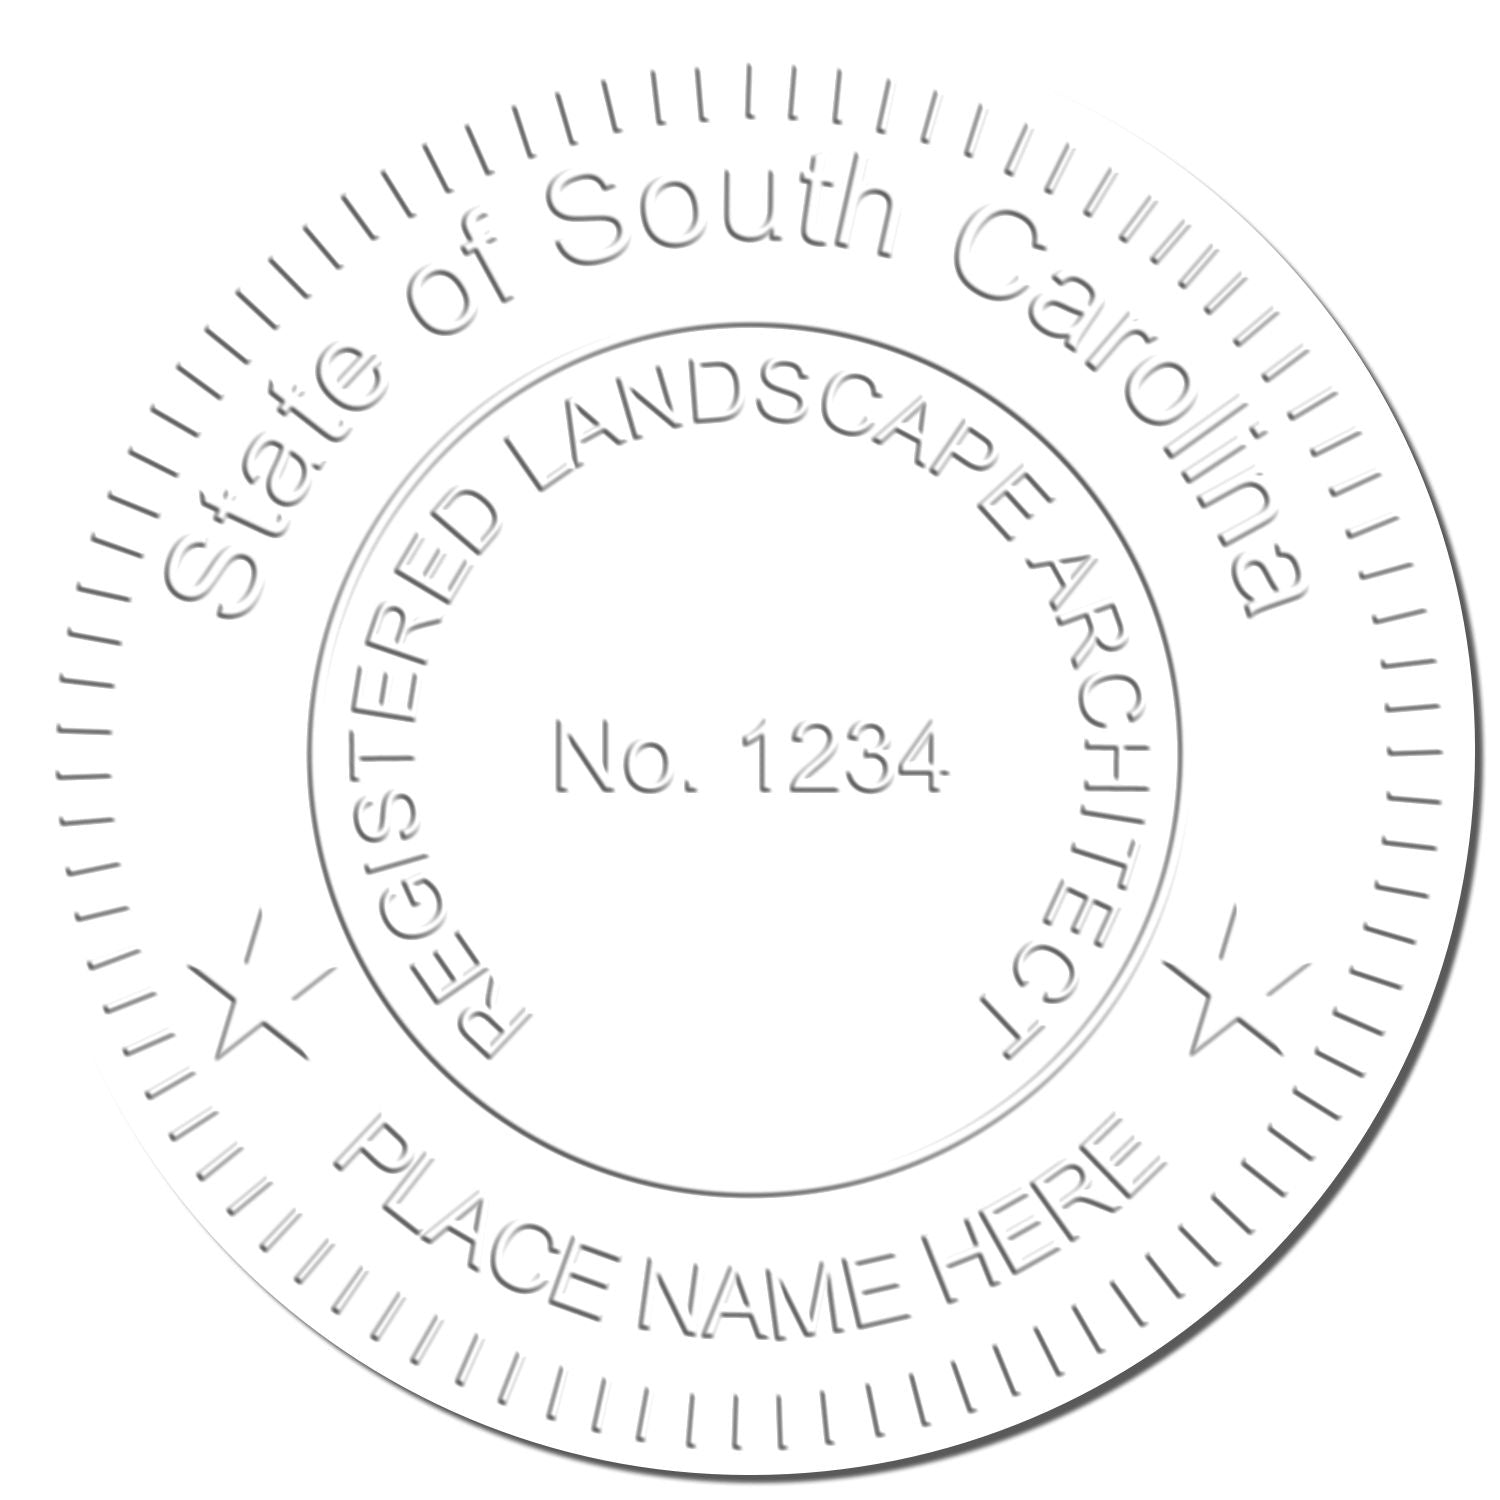 This paper is stamped with a sample imprint of the Hybrid South Carolina Landscape Architect Seal, signifying its quality and reliability.